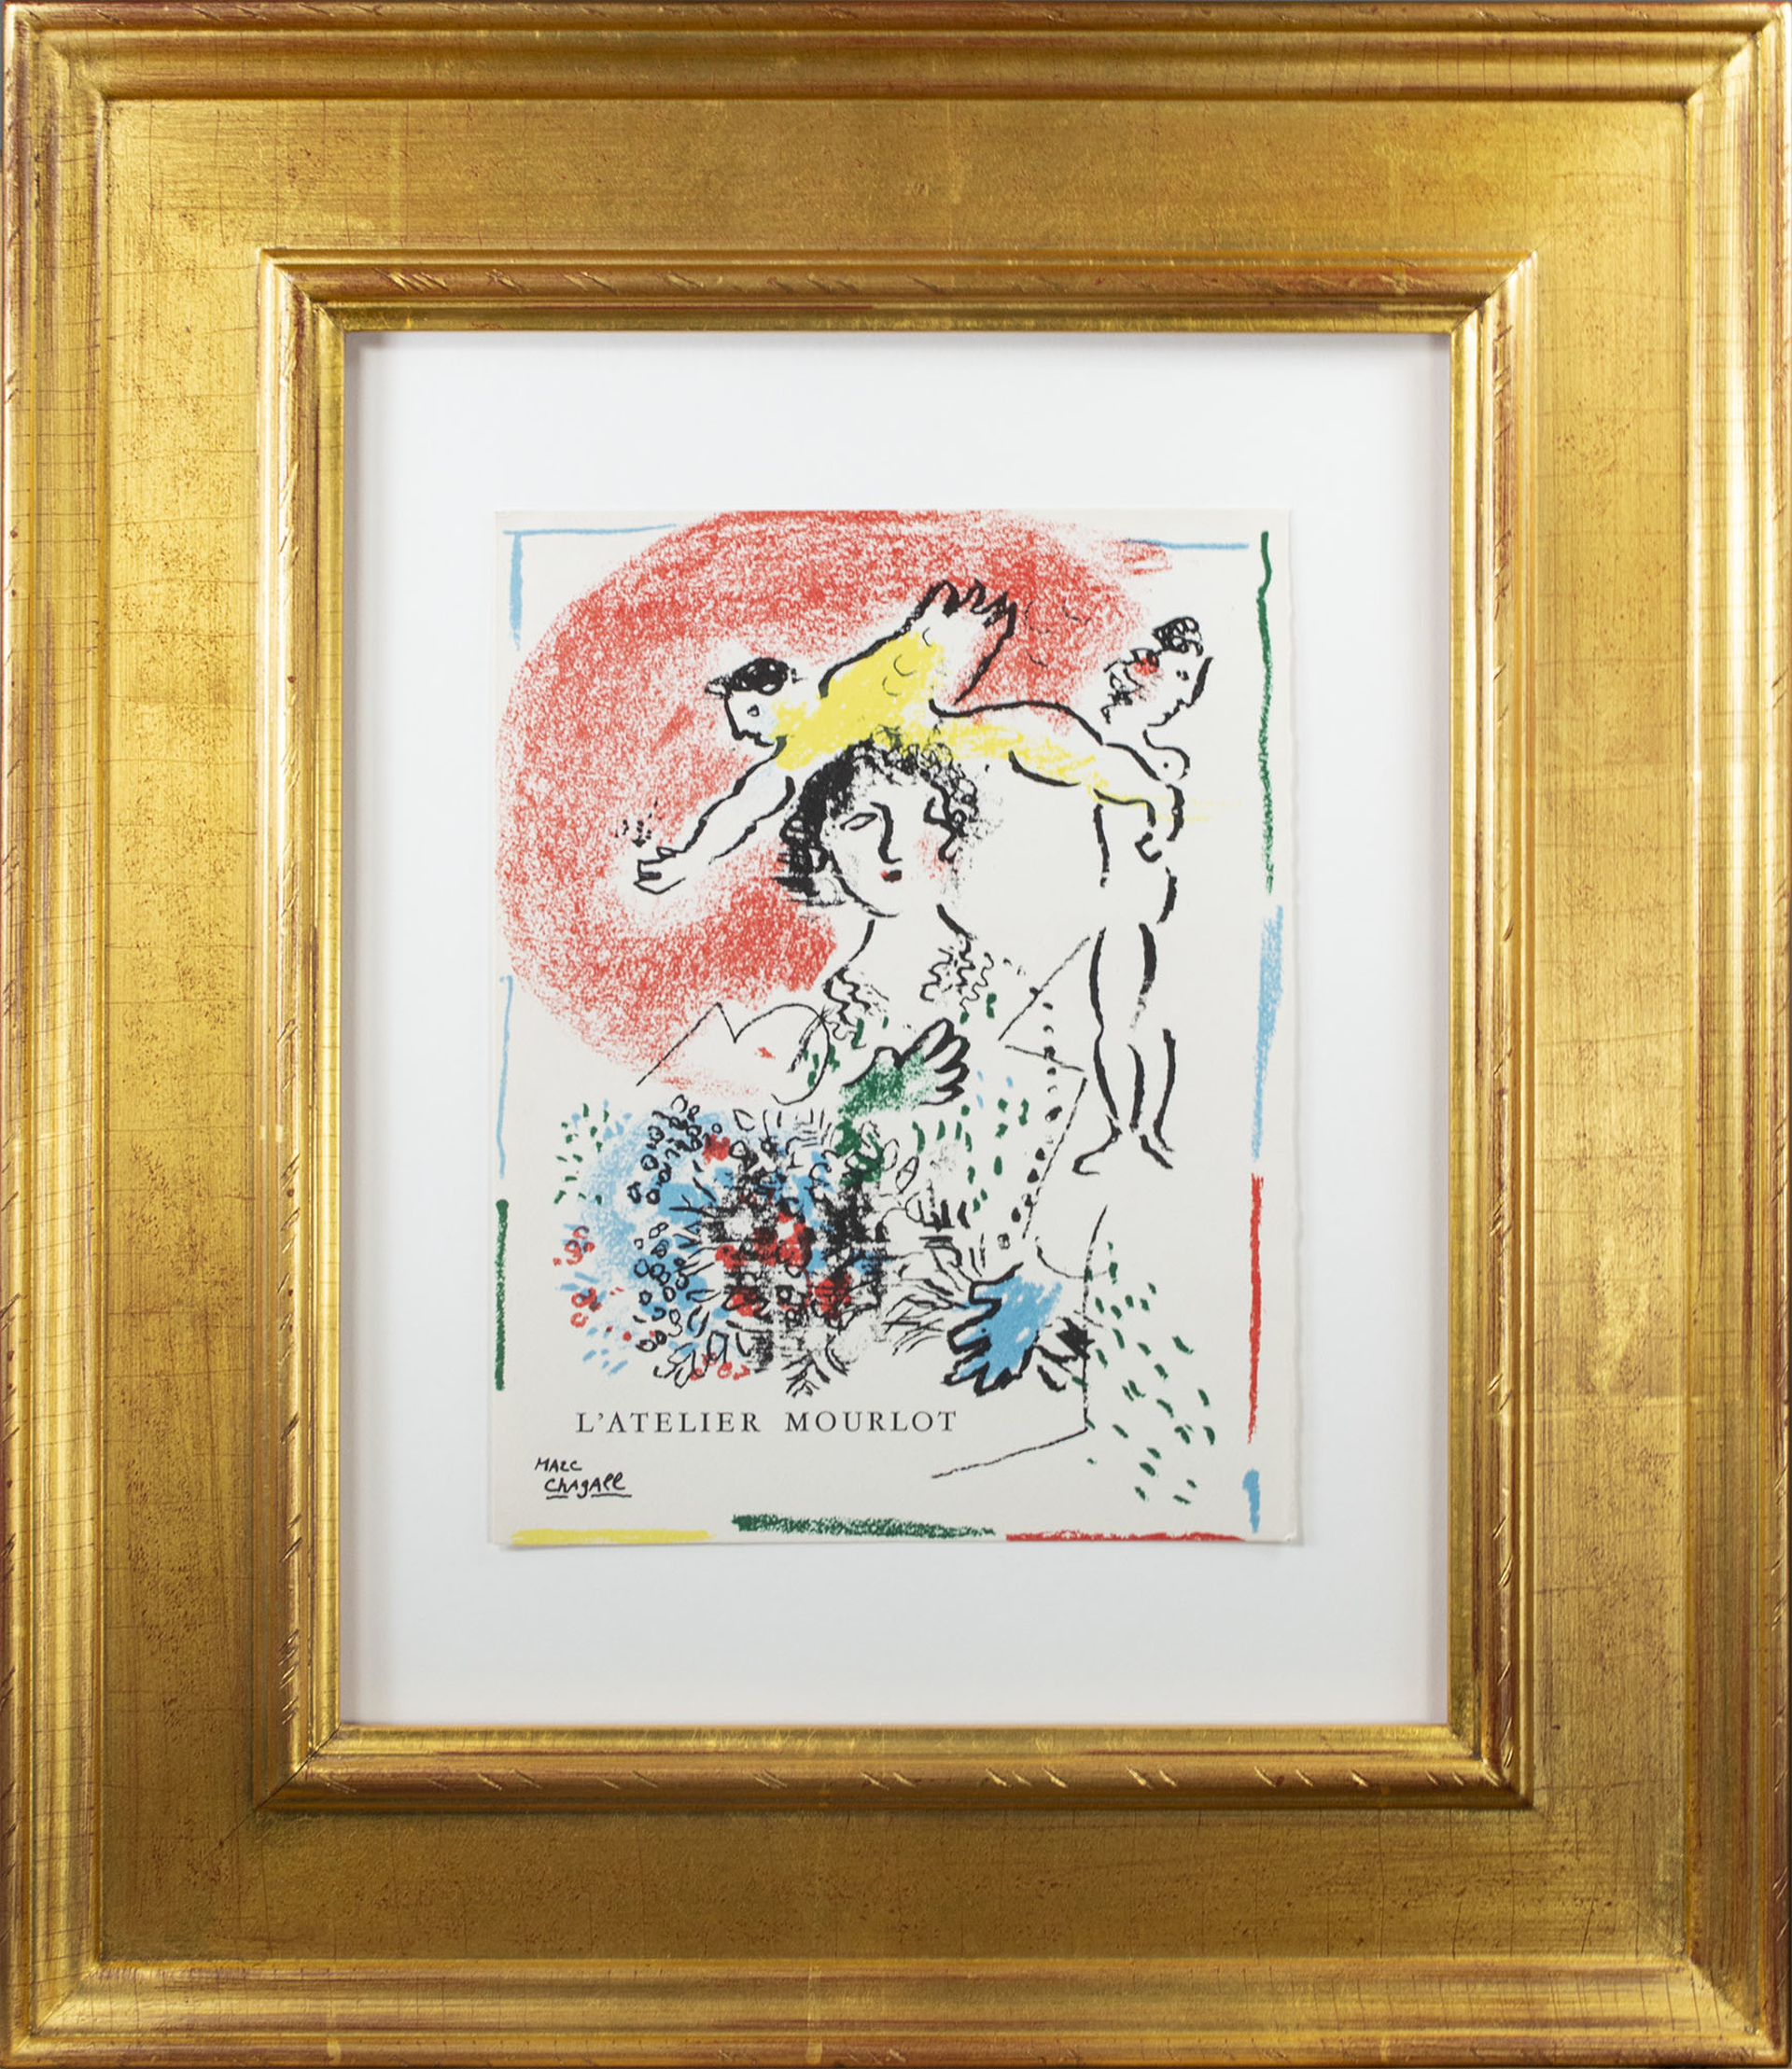 Cover by Marc Chagall